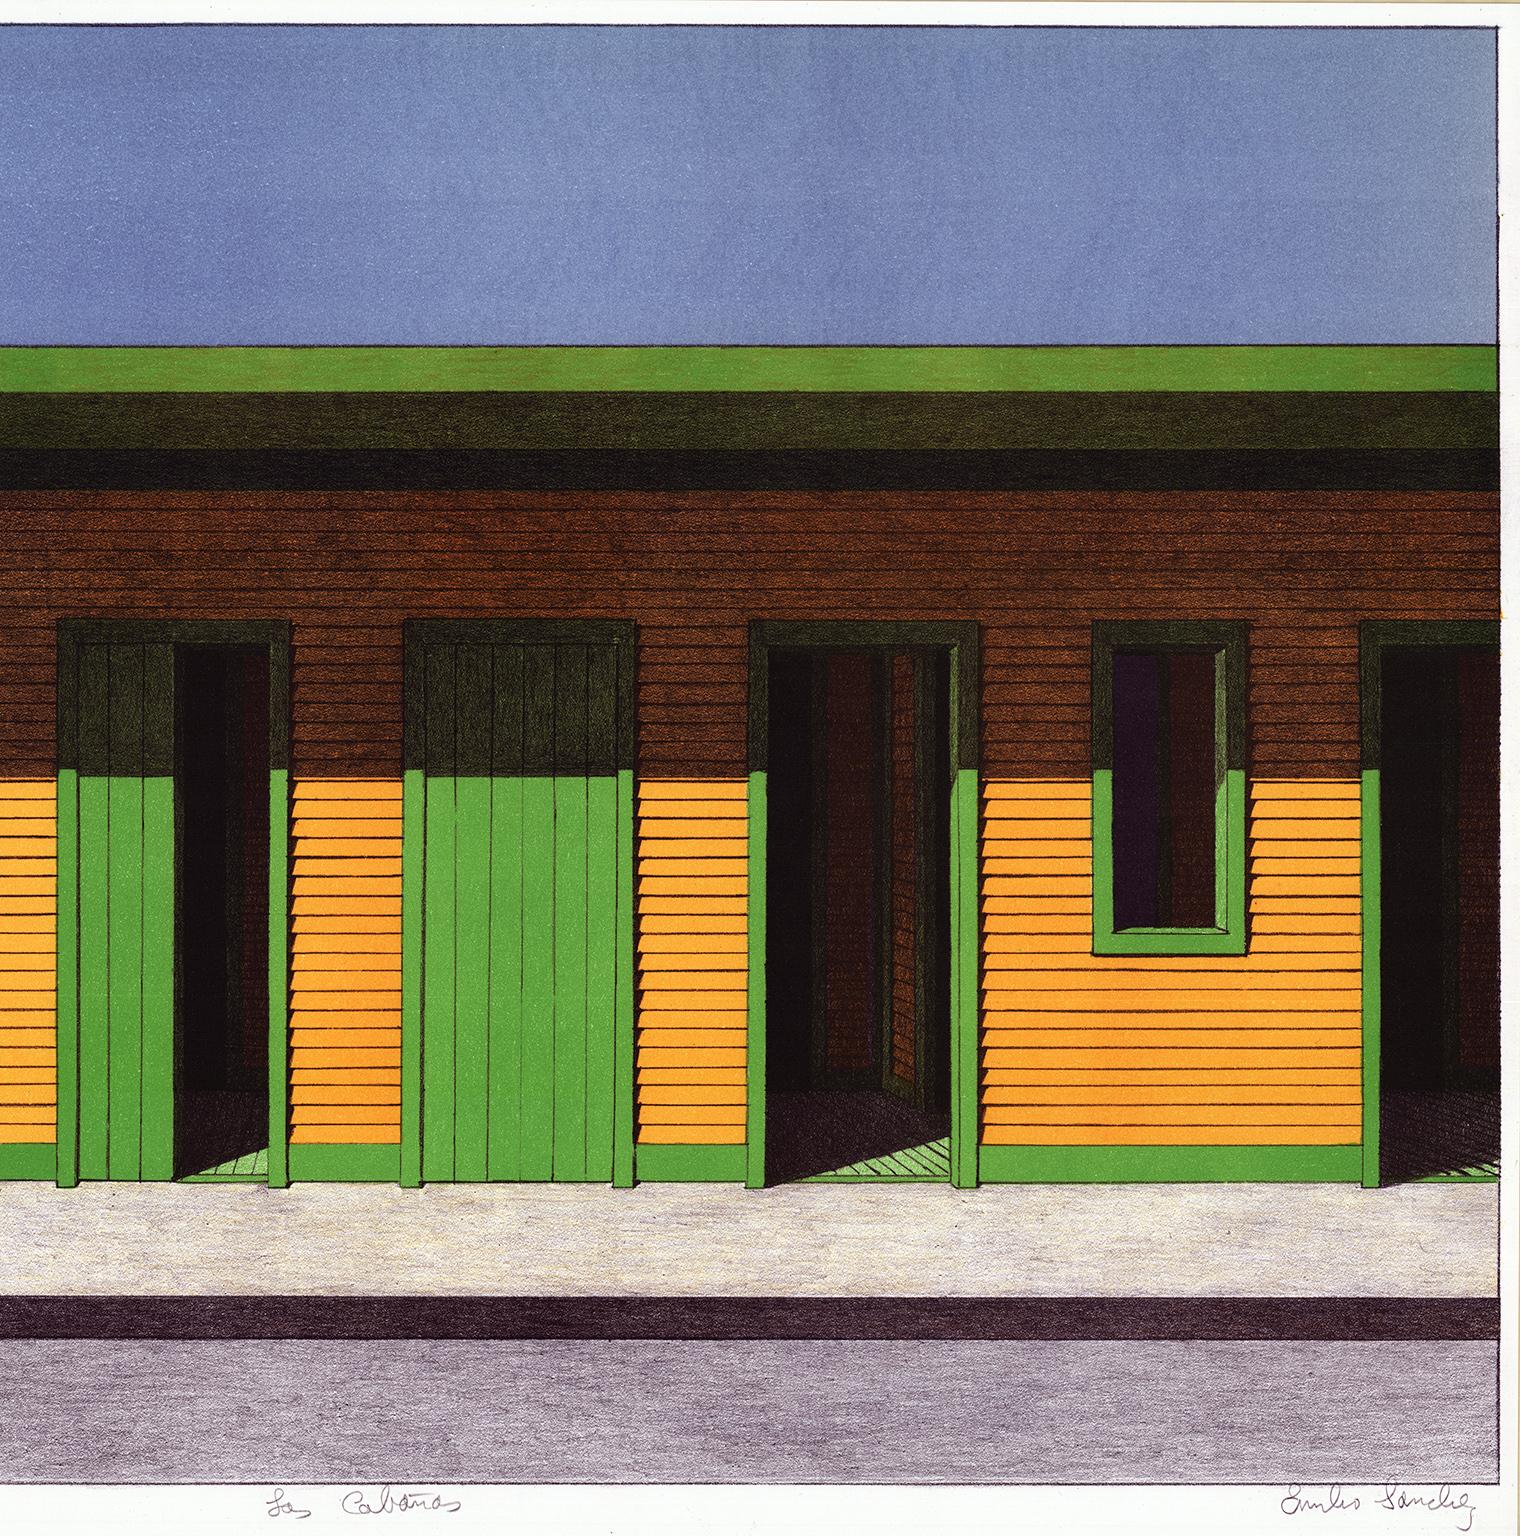 Emilio Sanchez (1921-1999) created this color lithograph entitled “LAS CABANAS” in 1996-98.  This impression is signed, titled, and inscribed in pencil. Estate stamped on verso.  The printed image size is 19.25 x 30 inches and paper size 20.38 x